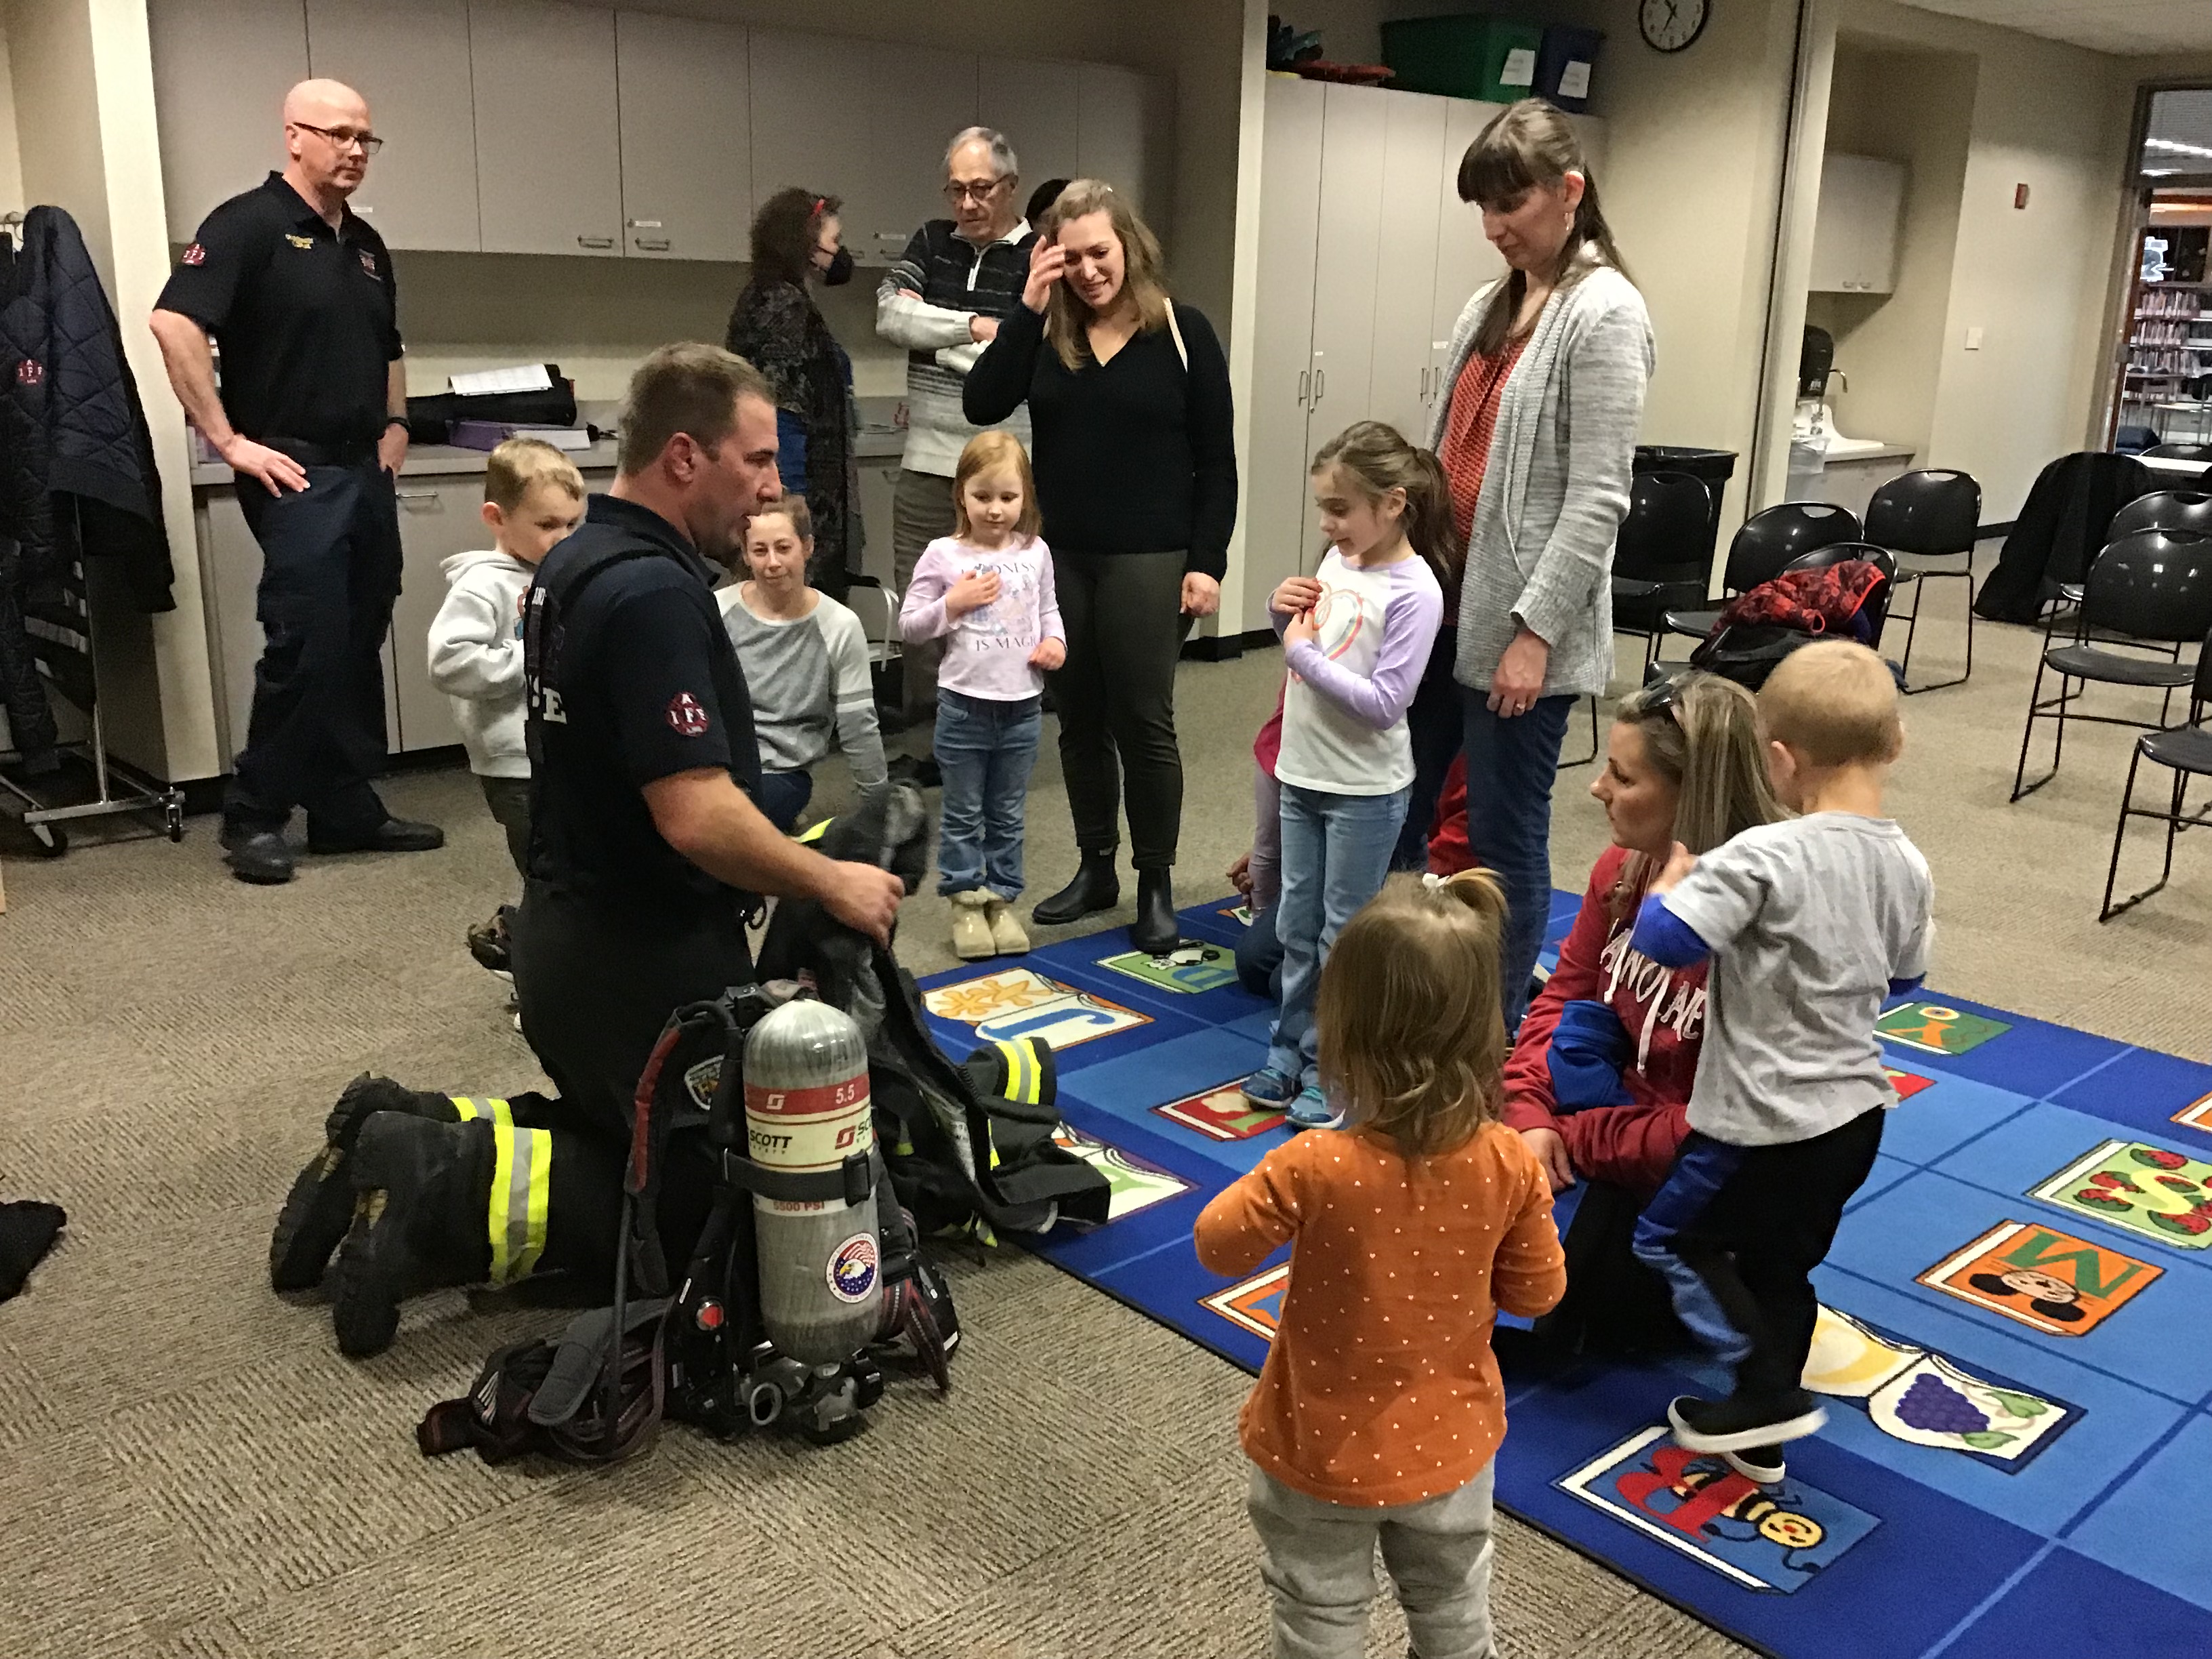 Police Storytime at Family Activity Night